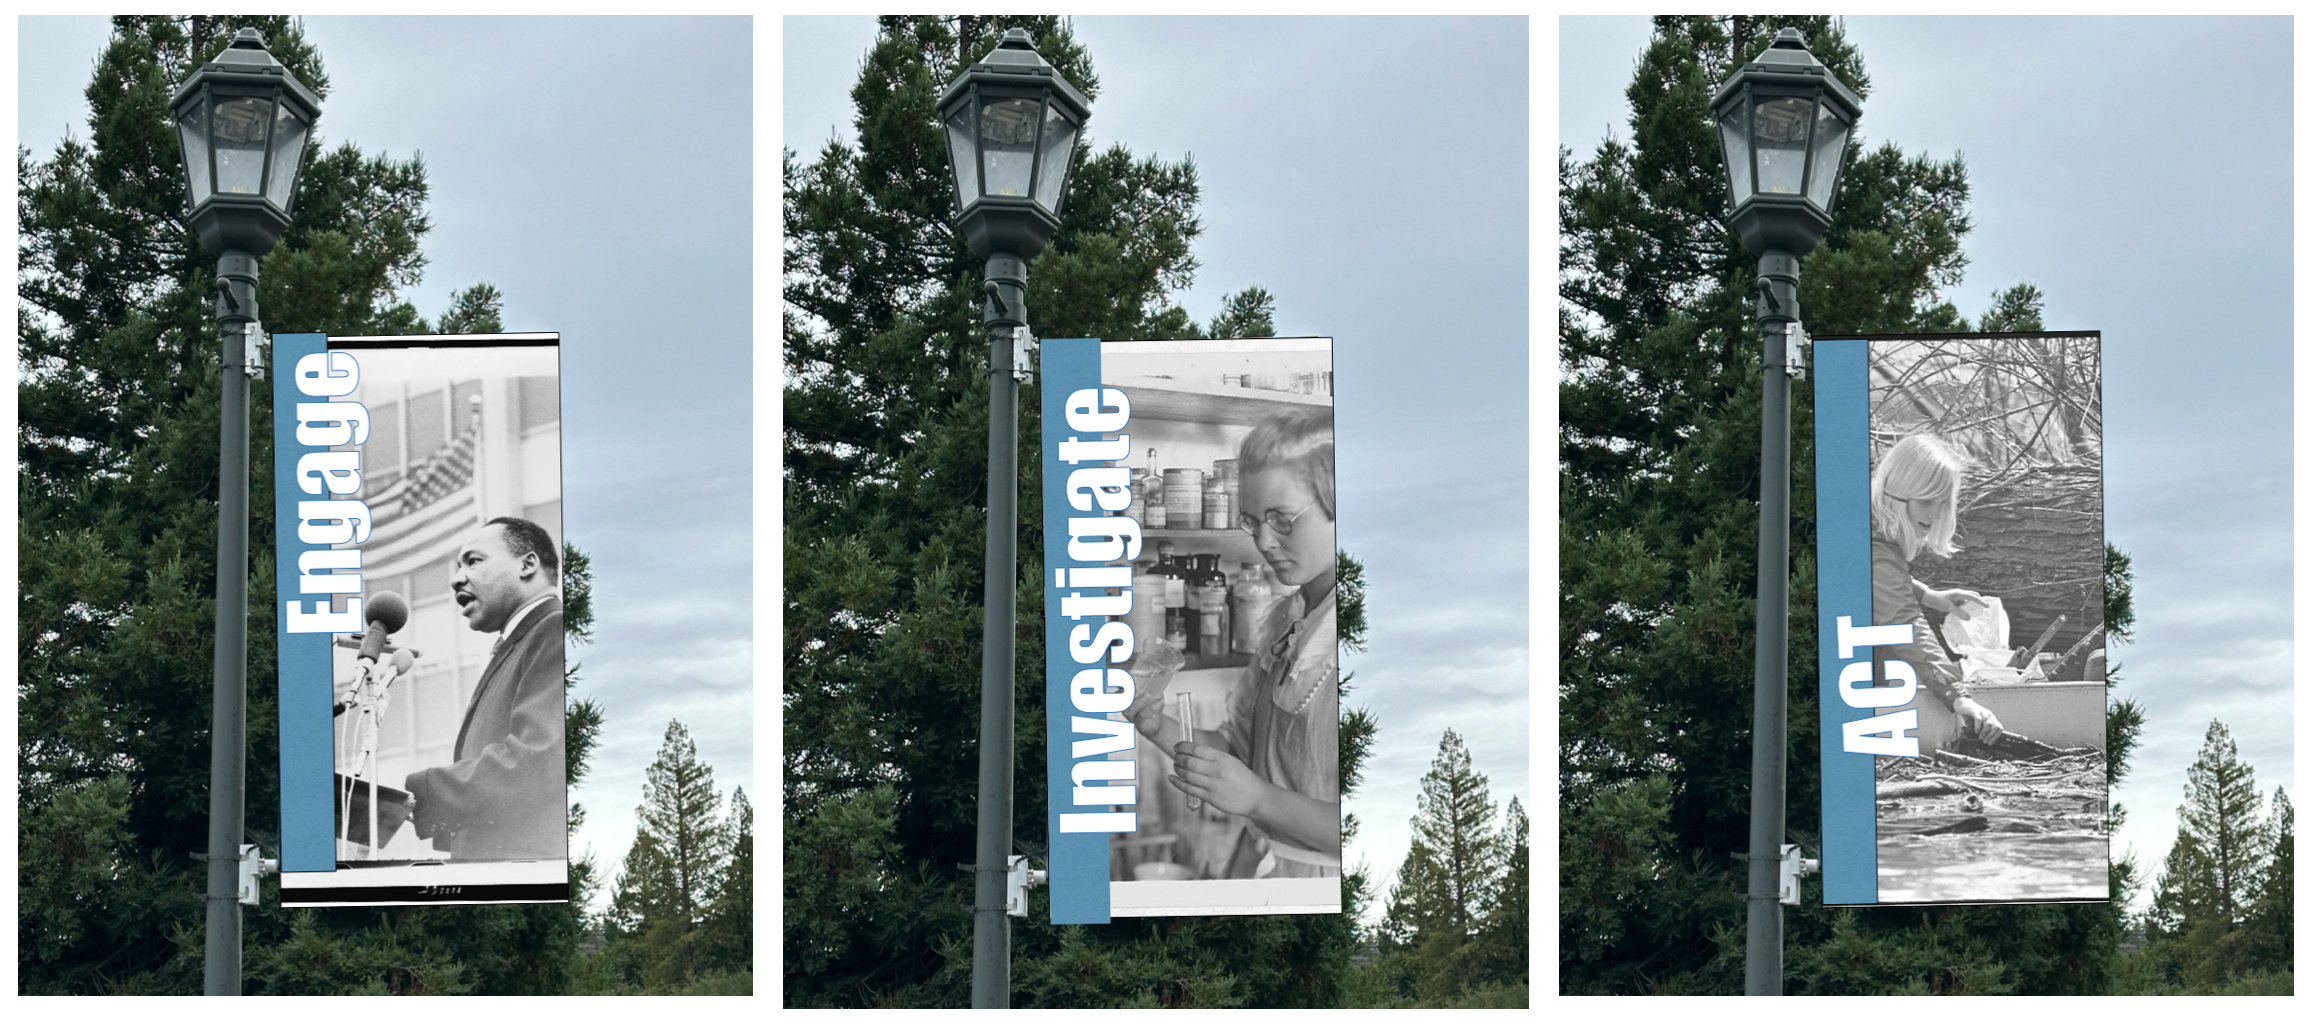 Lamp post banner - includes 3 primary sources each on a separate lamp post banner